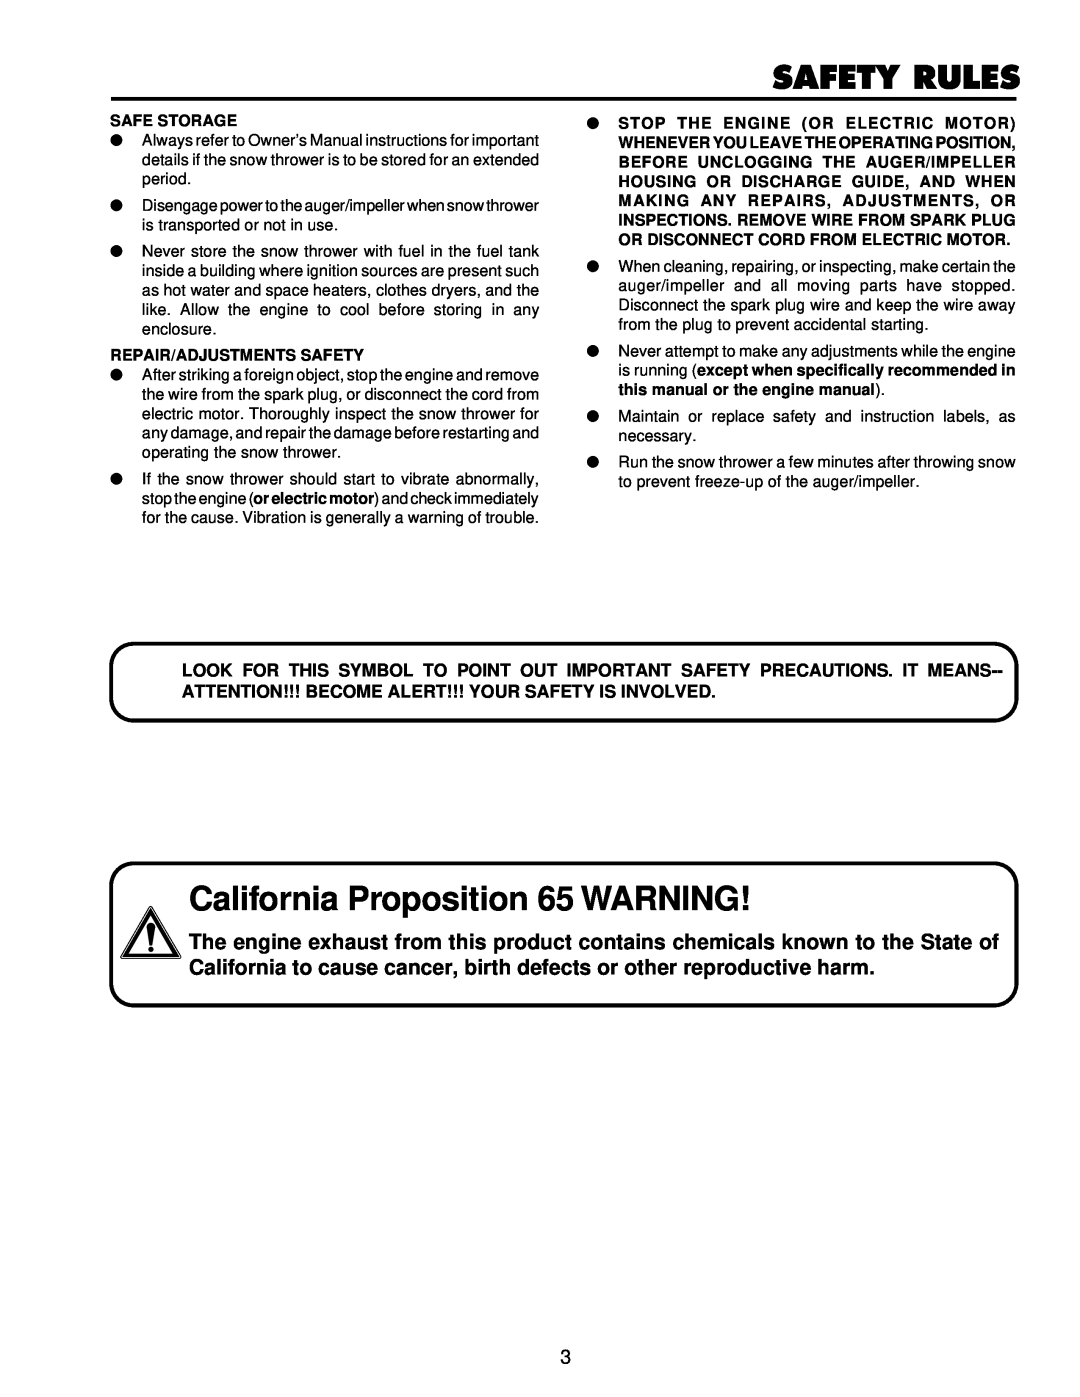 Husqvarna ST724 owner manual California Proposition 65 WARNING, Safety Rules, Safe Storage, Repair/Adjustments Safety 